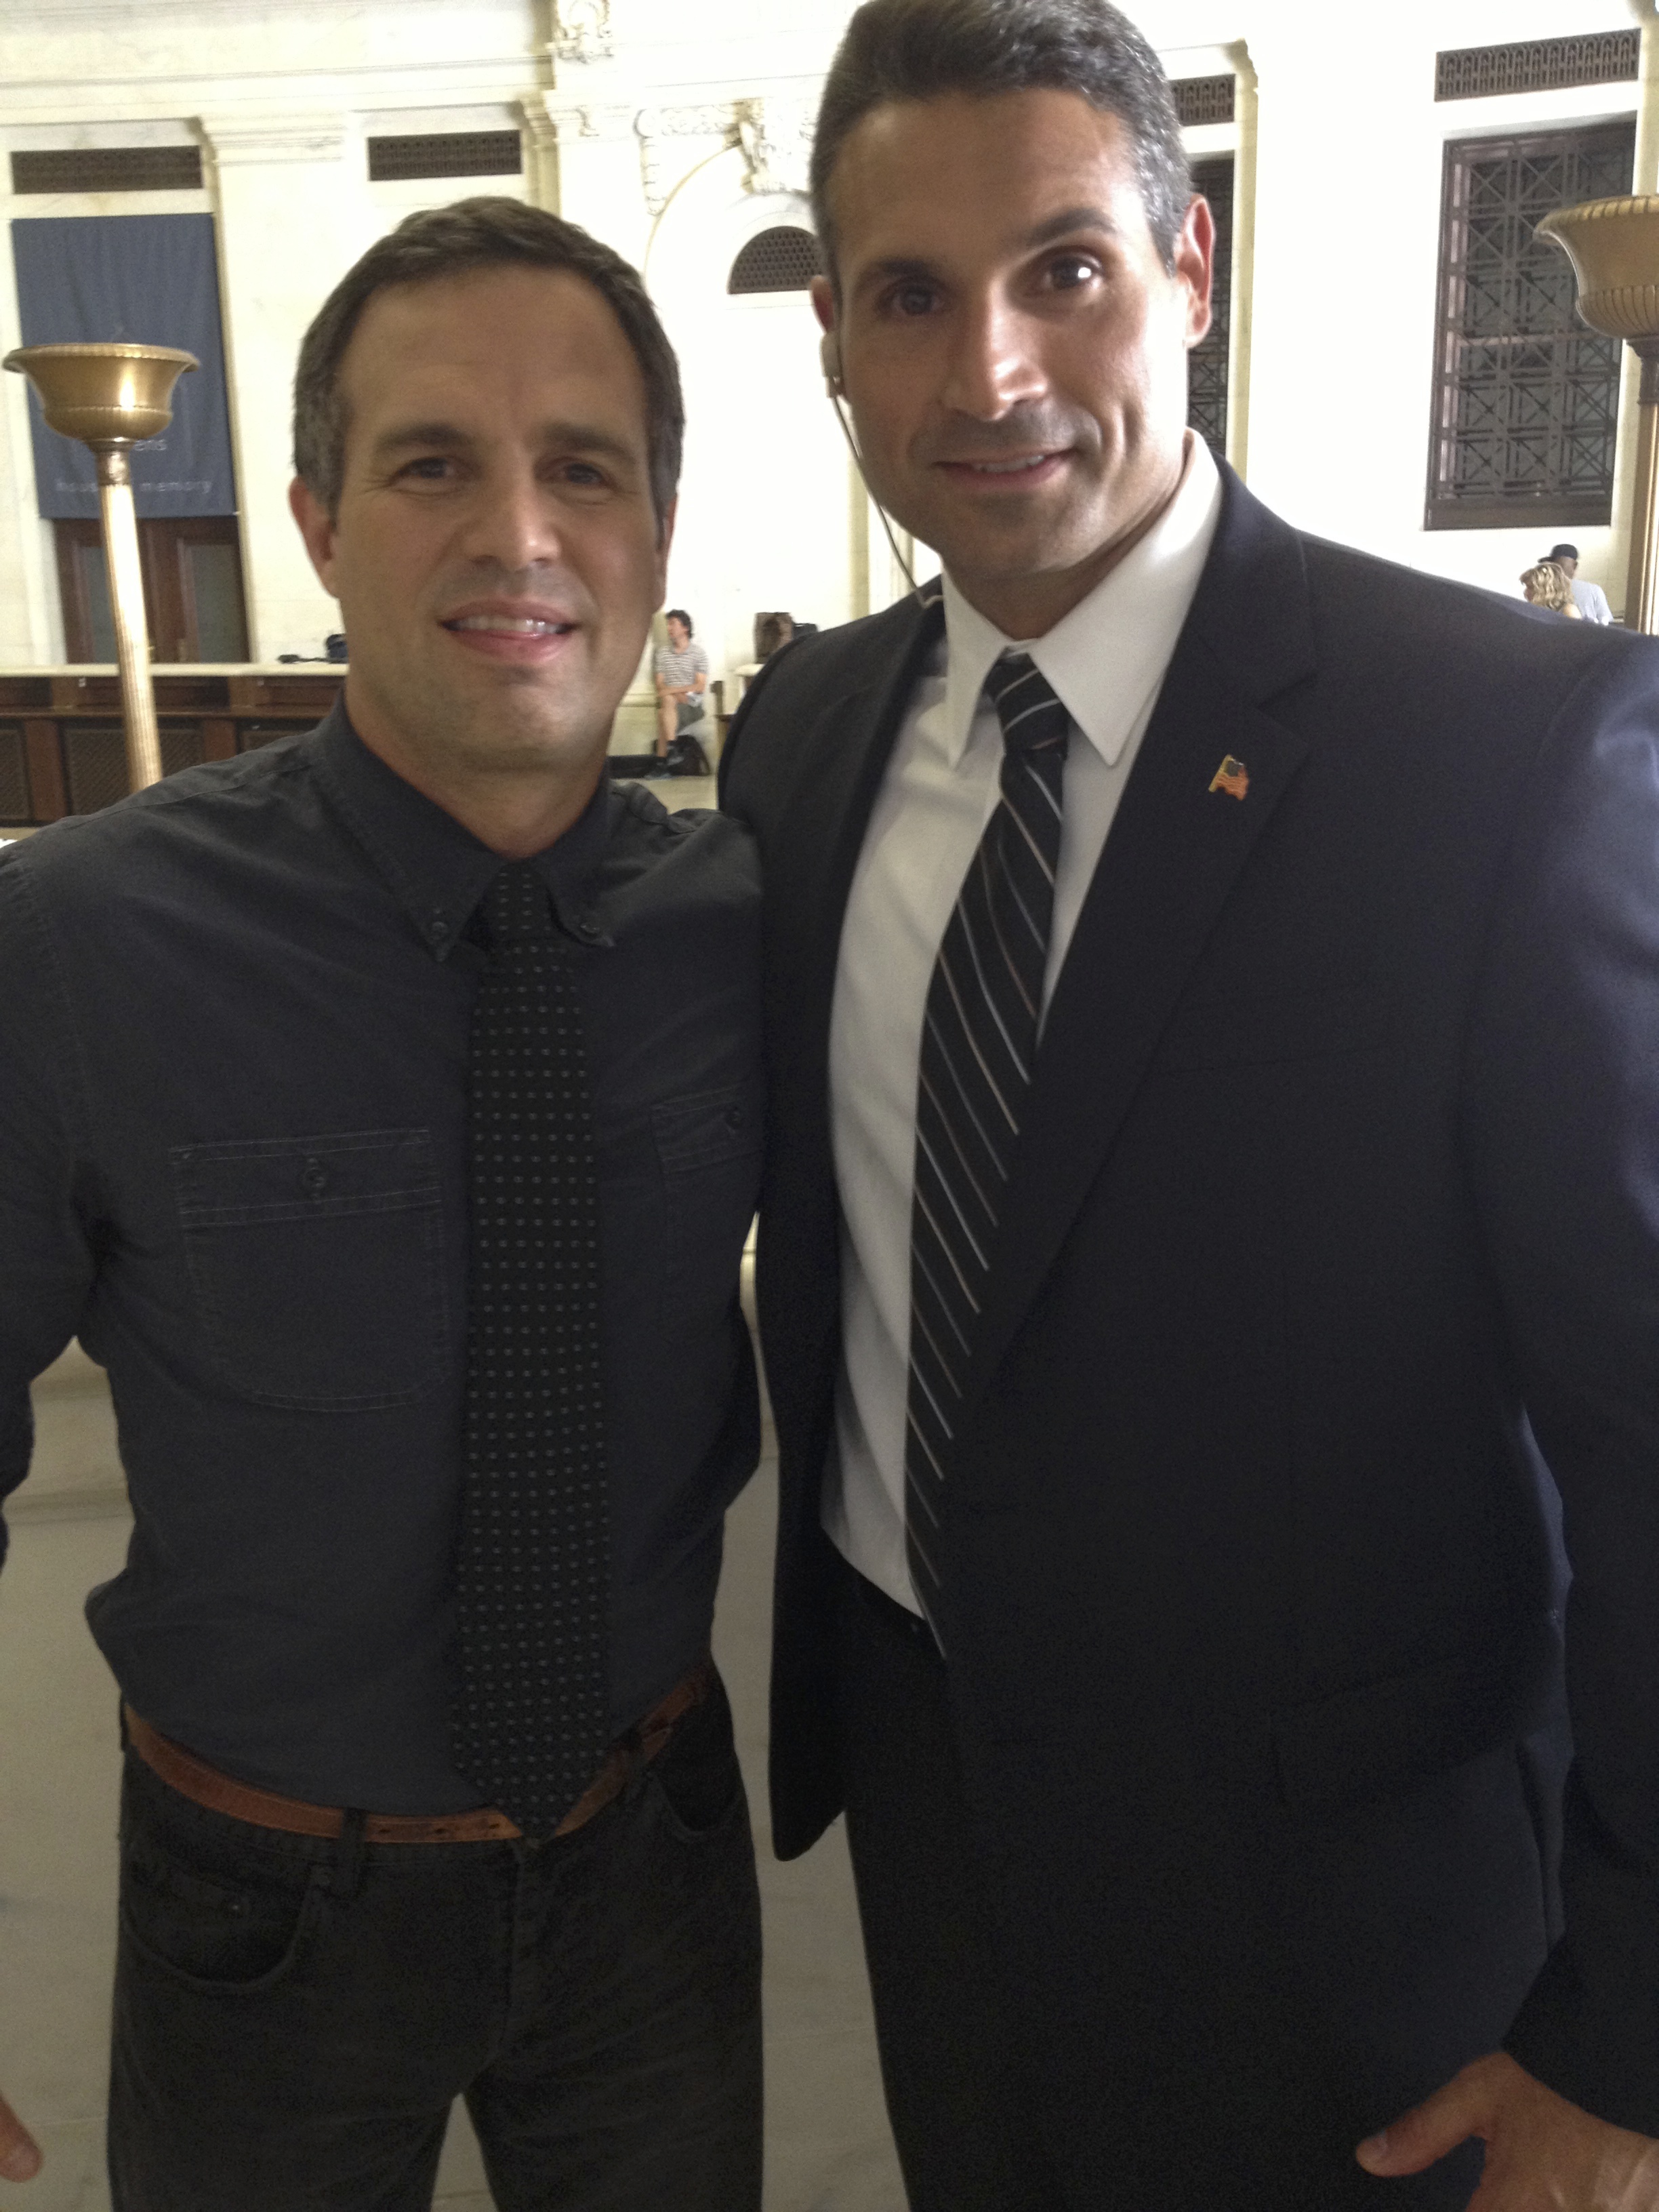 Frank Fortunato and Mark Ruffalo on the set of The Normal Heart.